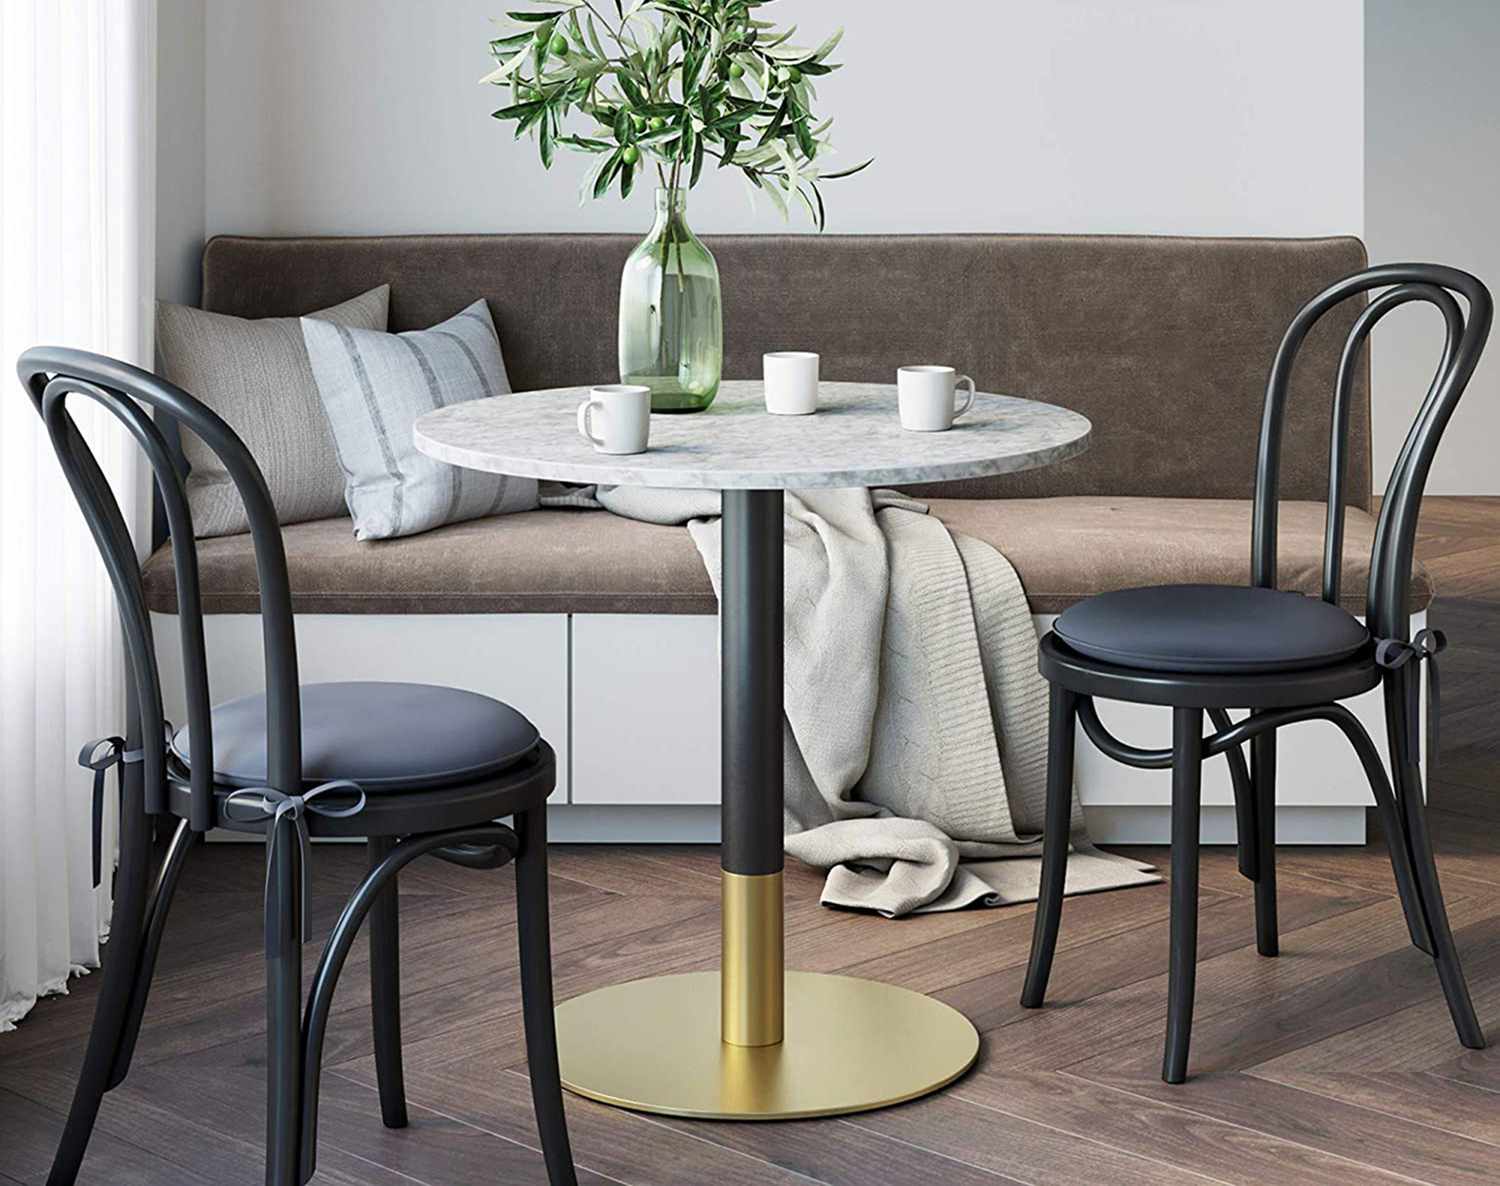 8 Best Dining Tables For Small Spaces, Dining Room Tables For Small Spaces